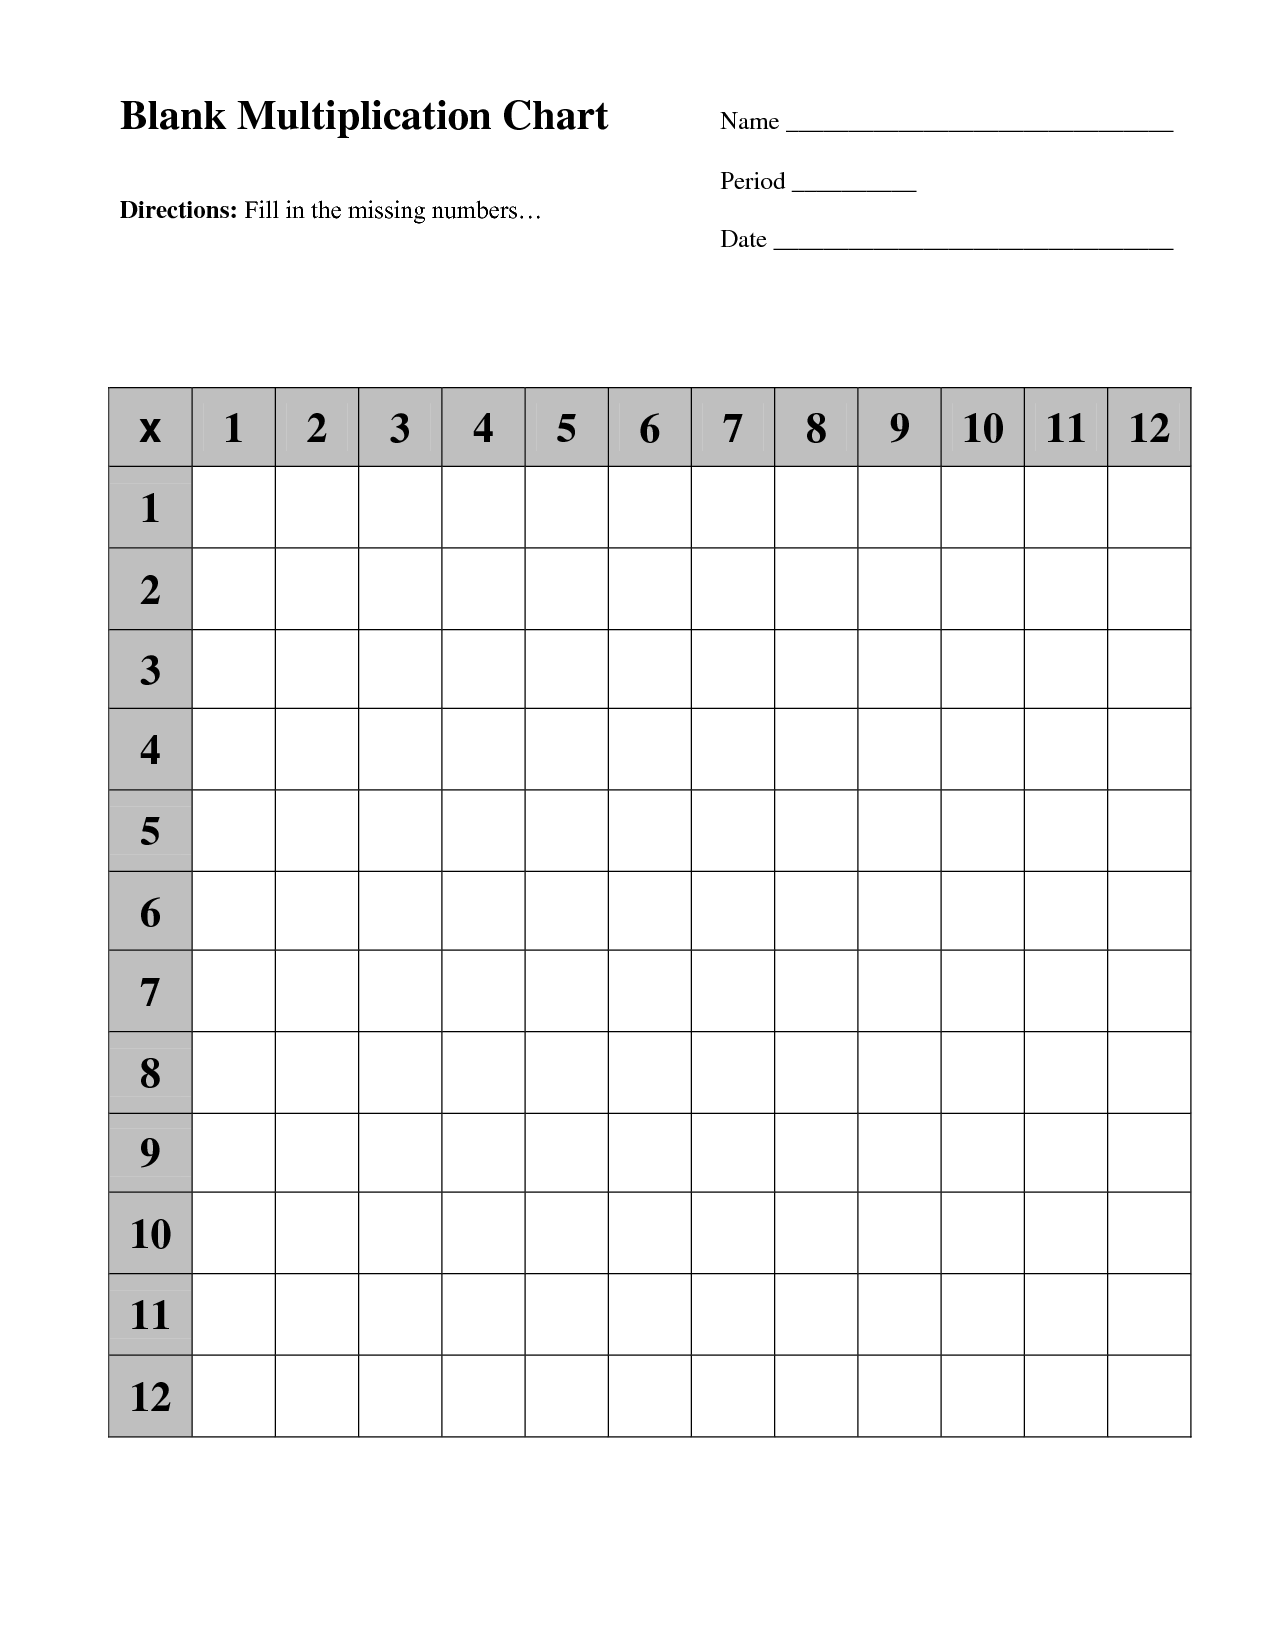 13-best-images-of-full-and-empty-worksheets-free-printable-blank-chore-chart-templates-blank